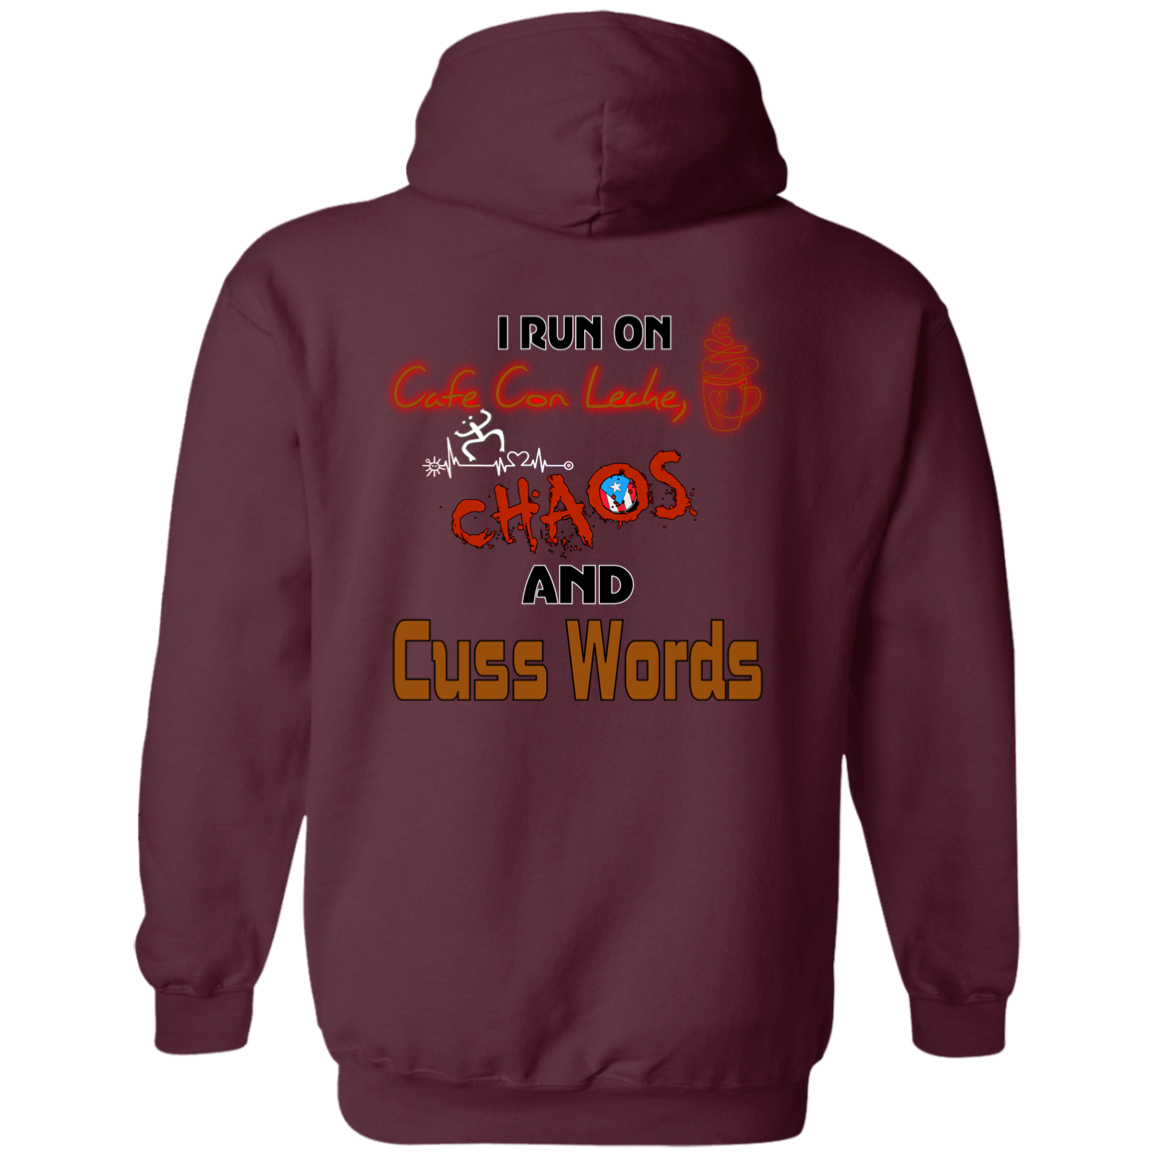 Cafe Con Leche, Chaos and Cuss Words  Hoodie 8 oz